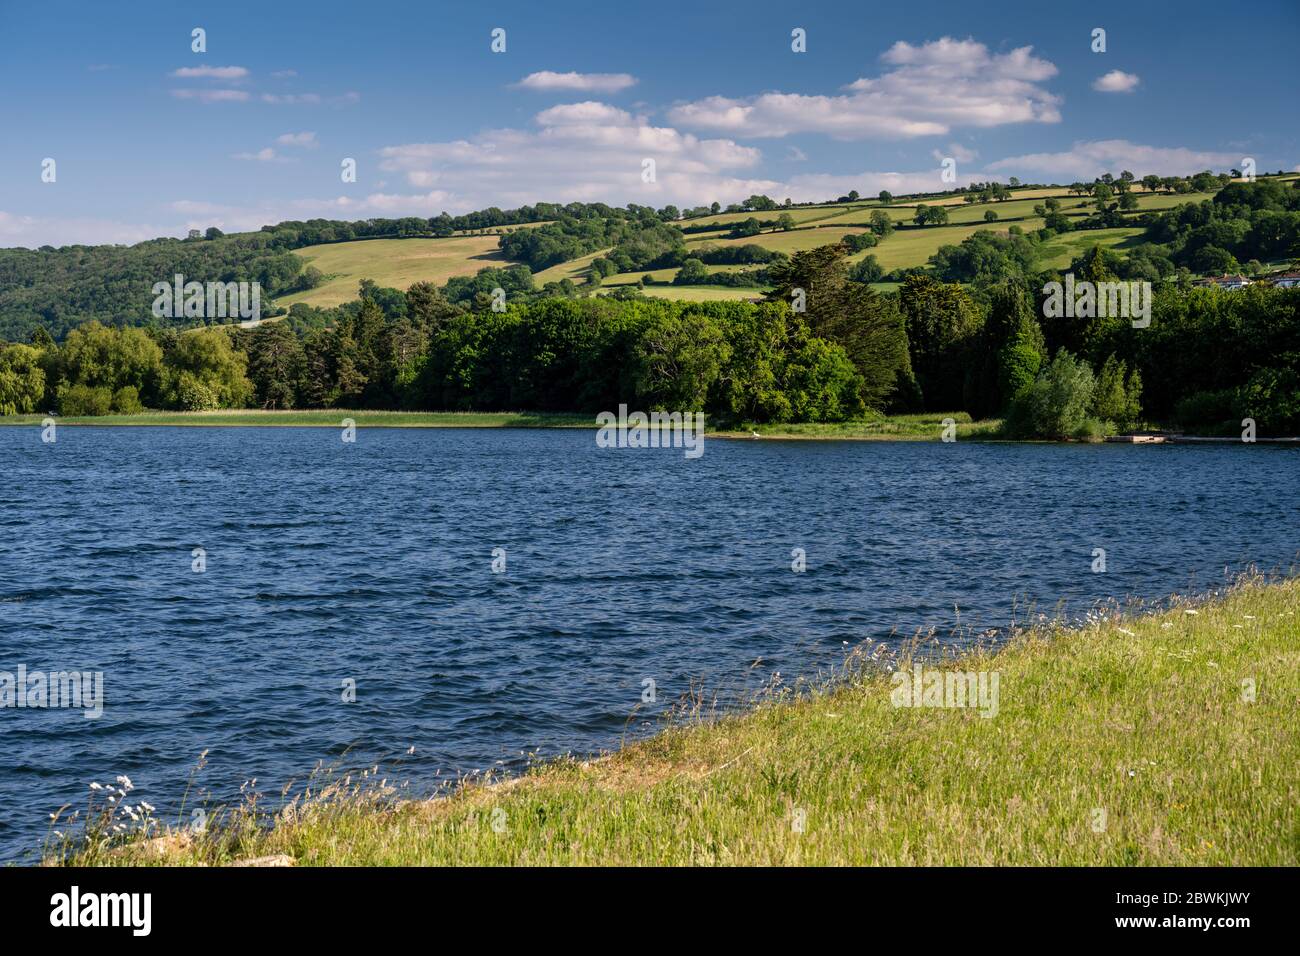 Pasture fields and woodland covers the hillsides of the Mendip Hills above Blagdon Lake in the pastoral landscape of North Somerset. Stock Photo